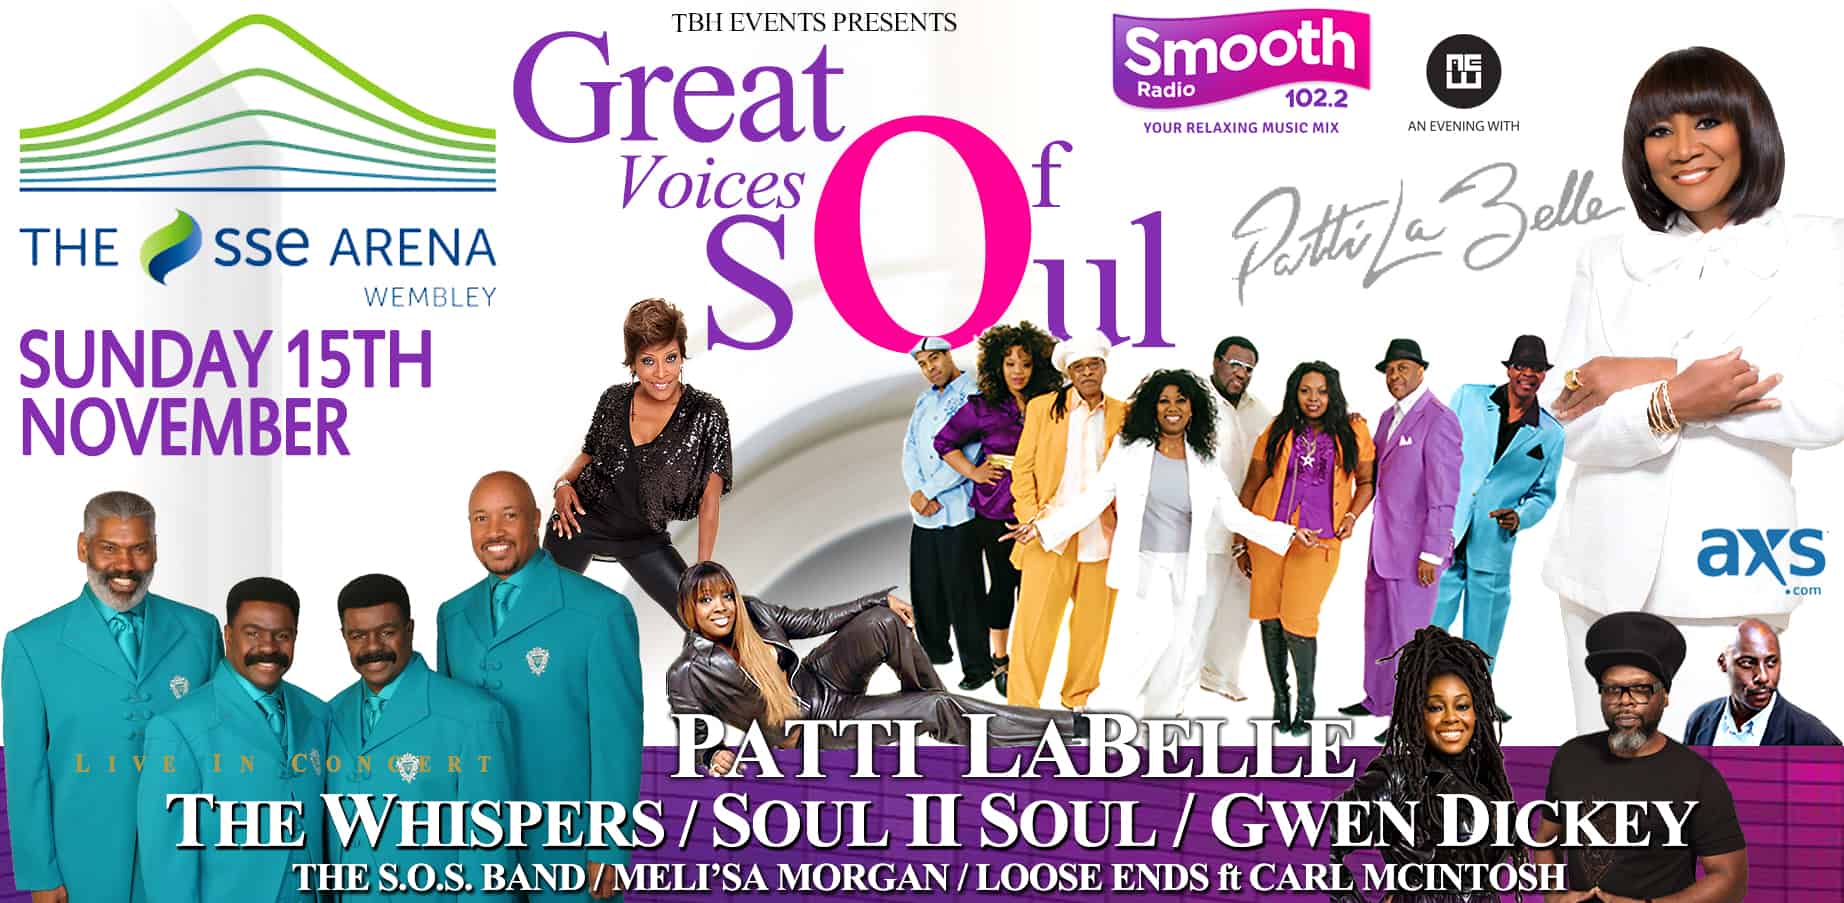 Smooth Radio. Great Voice. Patti Labelle CD albums.